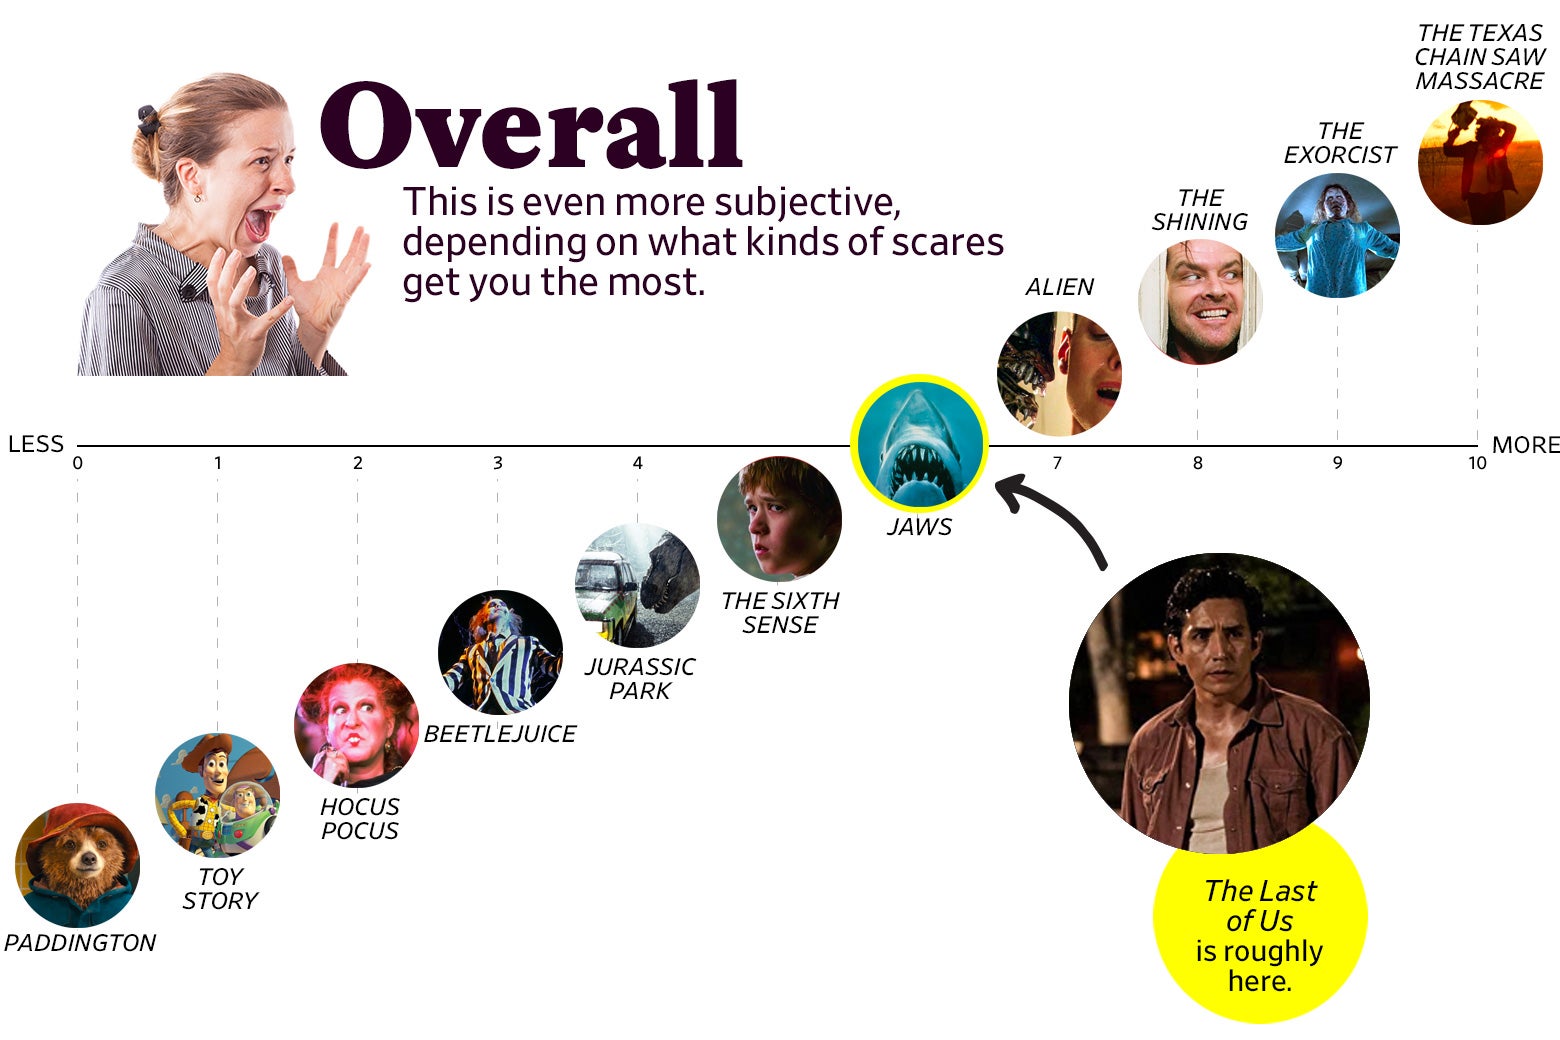 A chart titled “Overall: This is even more subjective, depending on what kinds of scares get you the most” shows that The Last of Us ranks as a 6 overall, roughly the same as Jaws. The scale ranges from Paddington (0) to the original Texas Chain Saw Massacre (10).